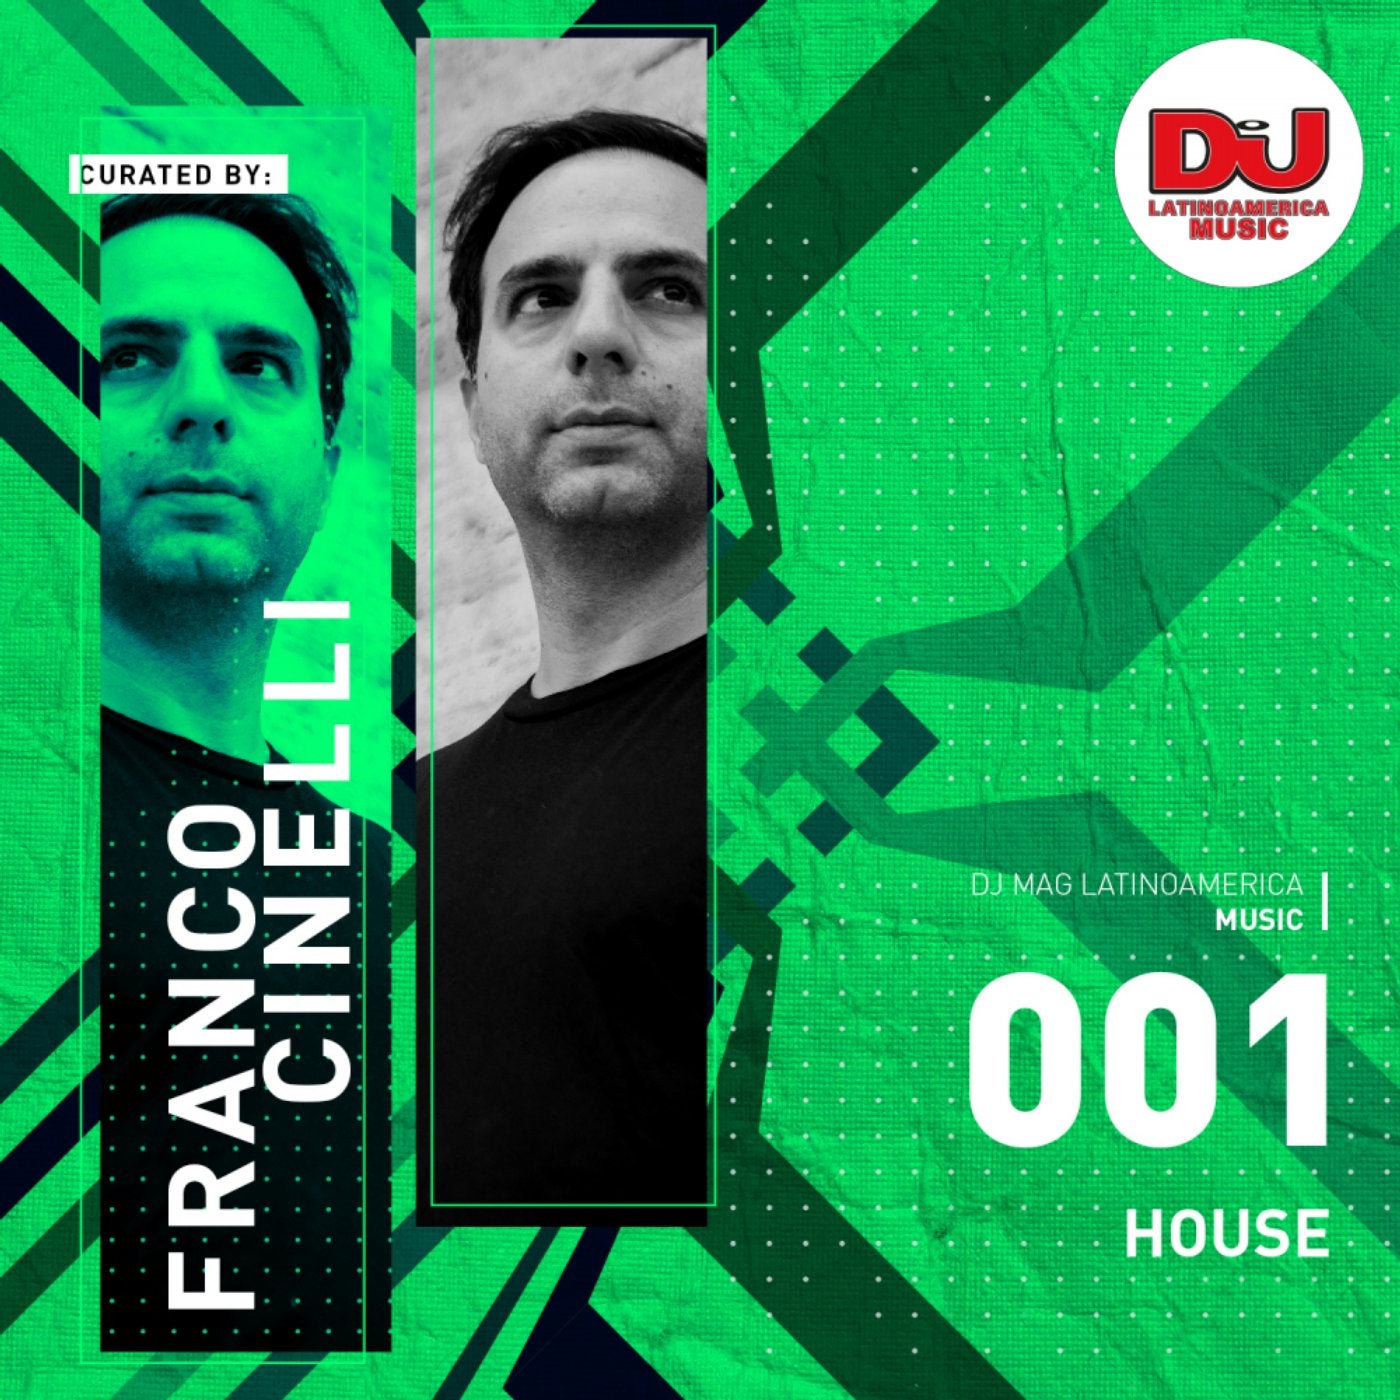 House Selections 001 - Curated by: Franco Cinelli